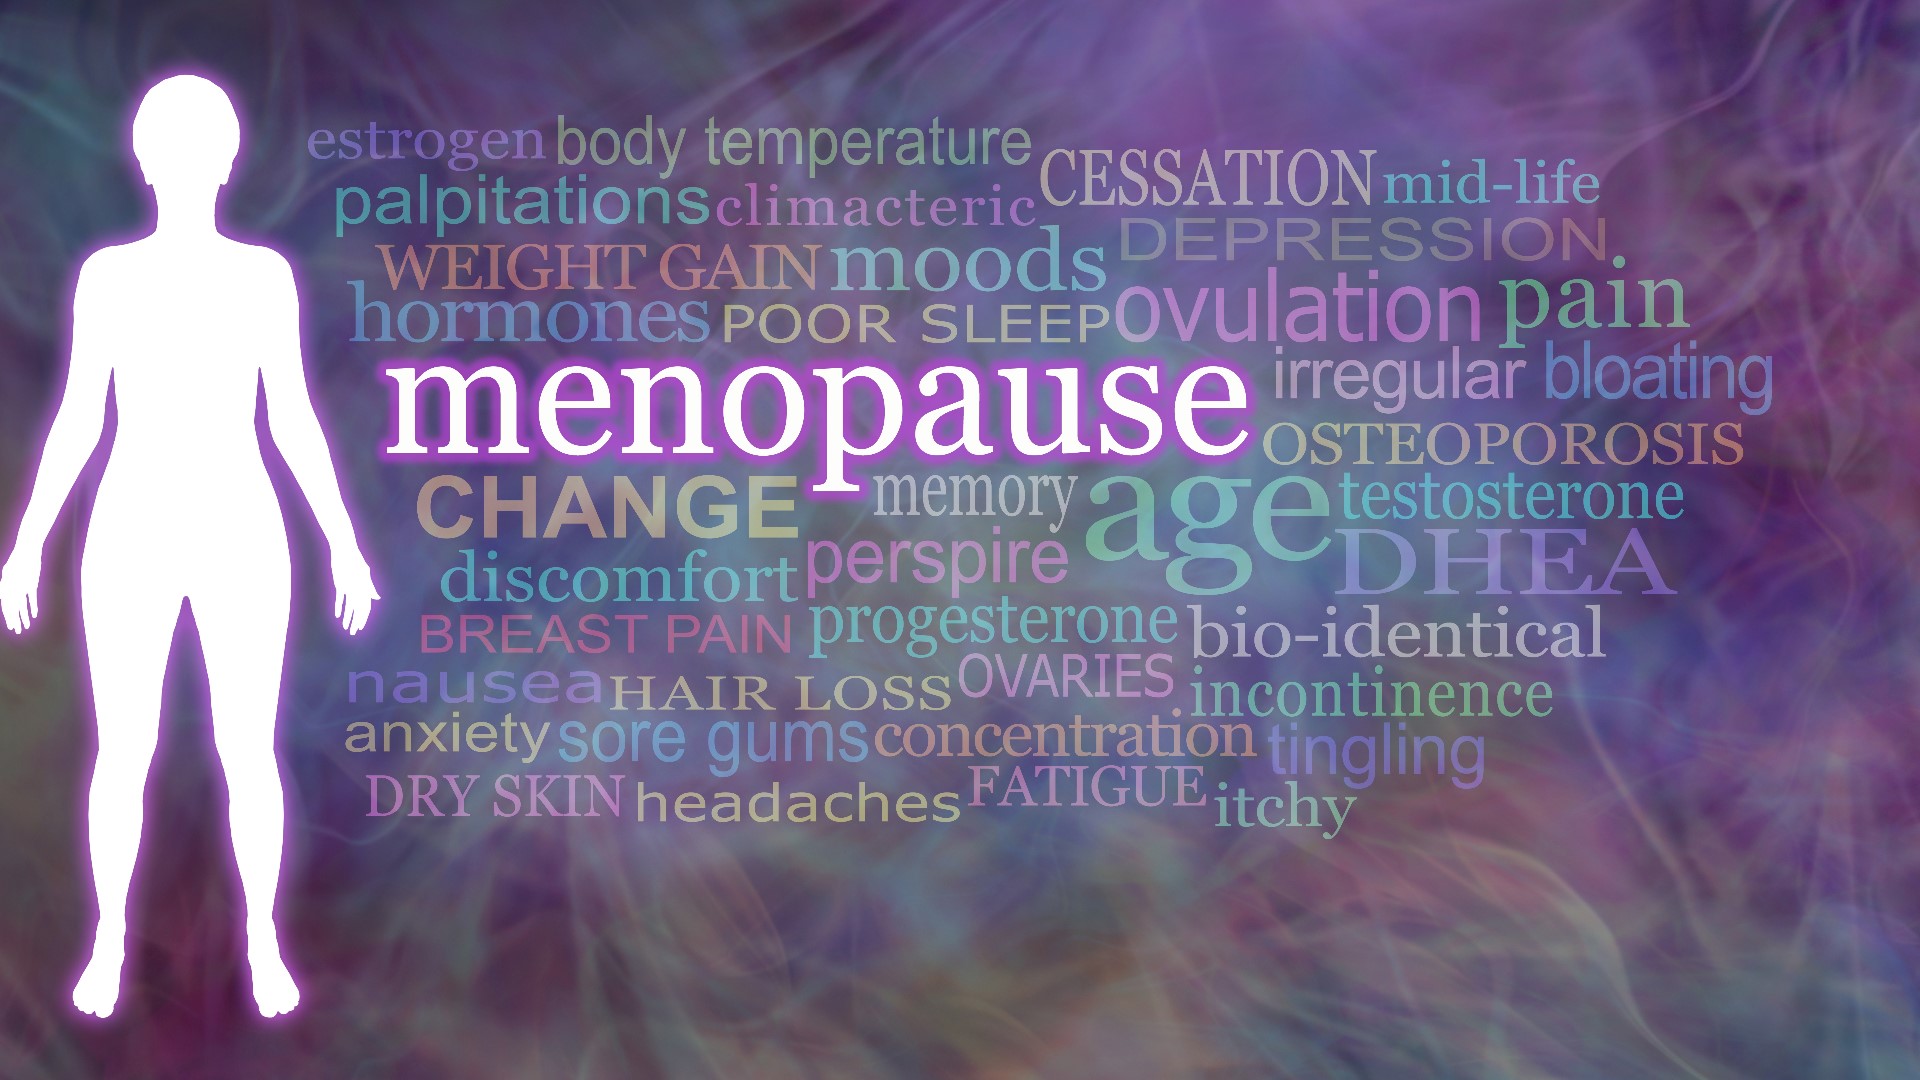 There is a lot of misguided information about menopause so co-founder of Morphus and menopause educator Andrea Donsky explains the facts of biological process.